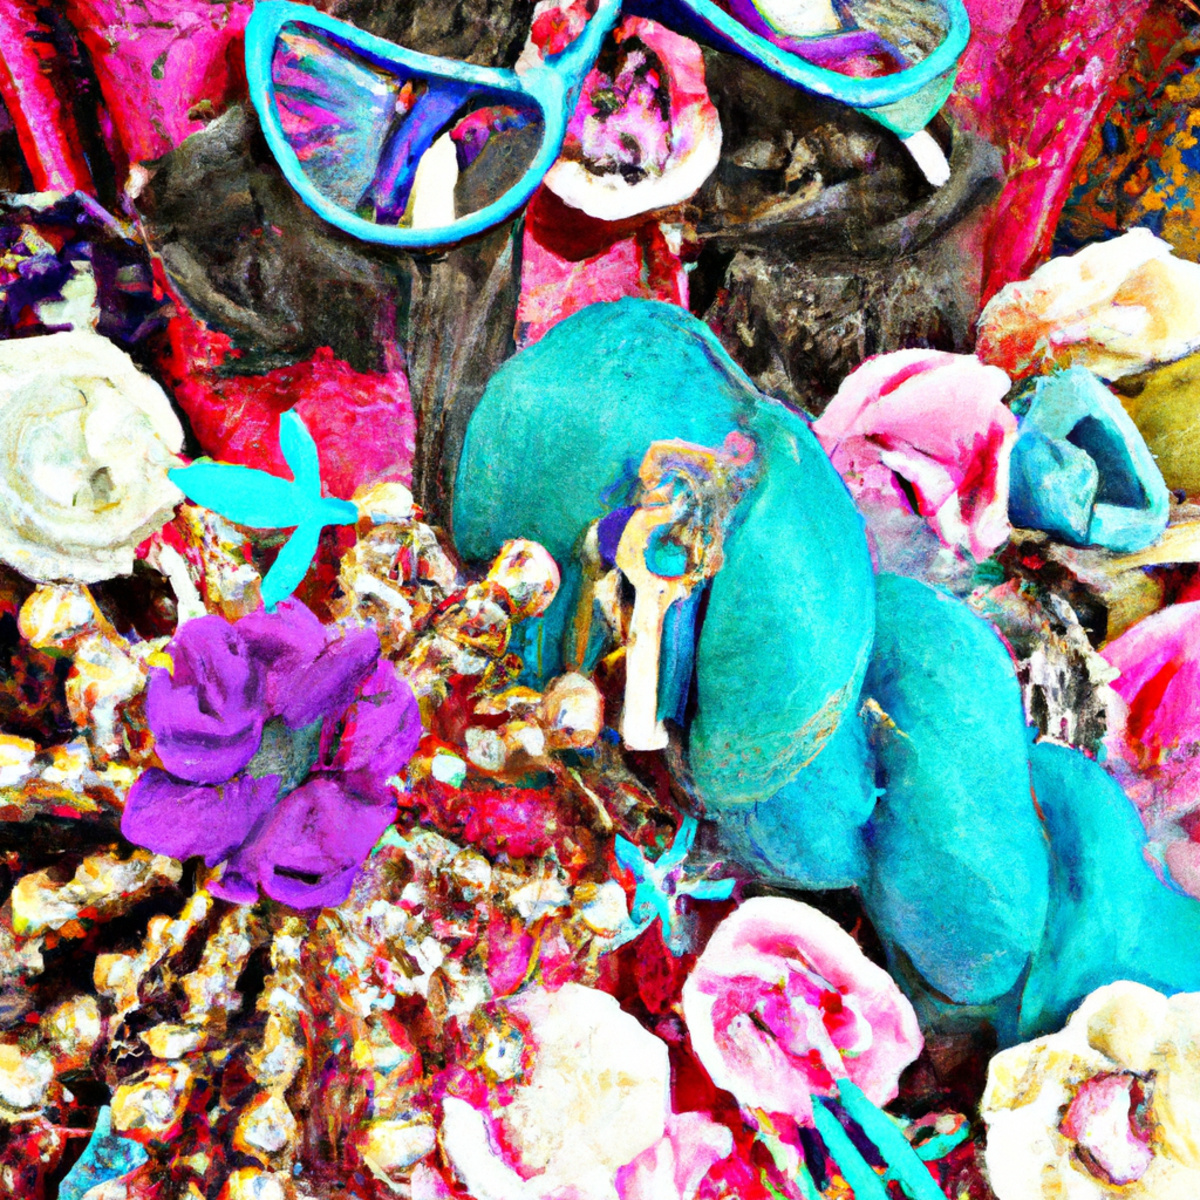 A vibrant display of trendy hair accessories, featuring clips and barrettes made from shimmering metals, pearls, and gemstones.